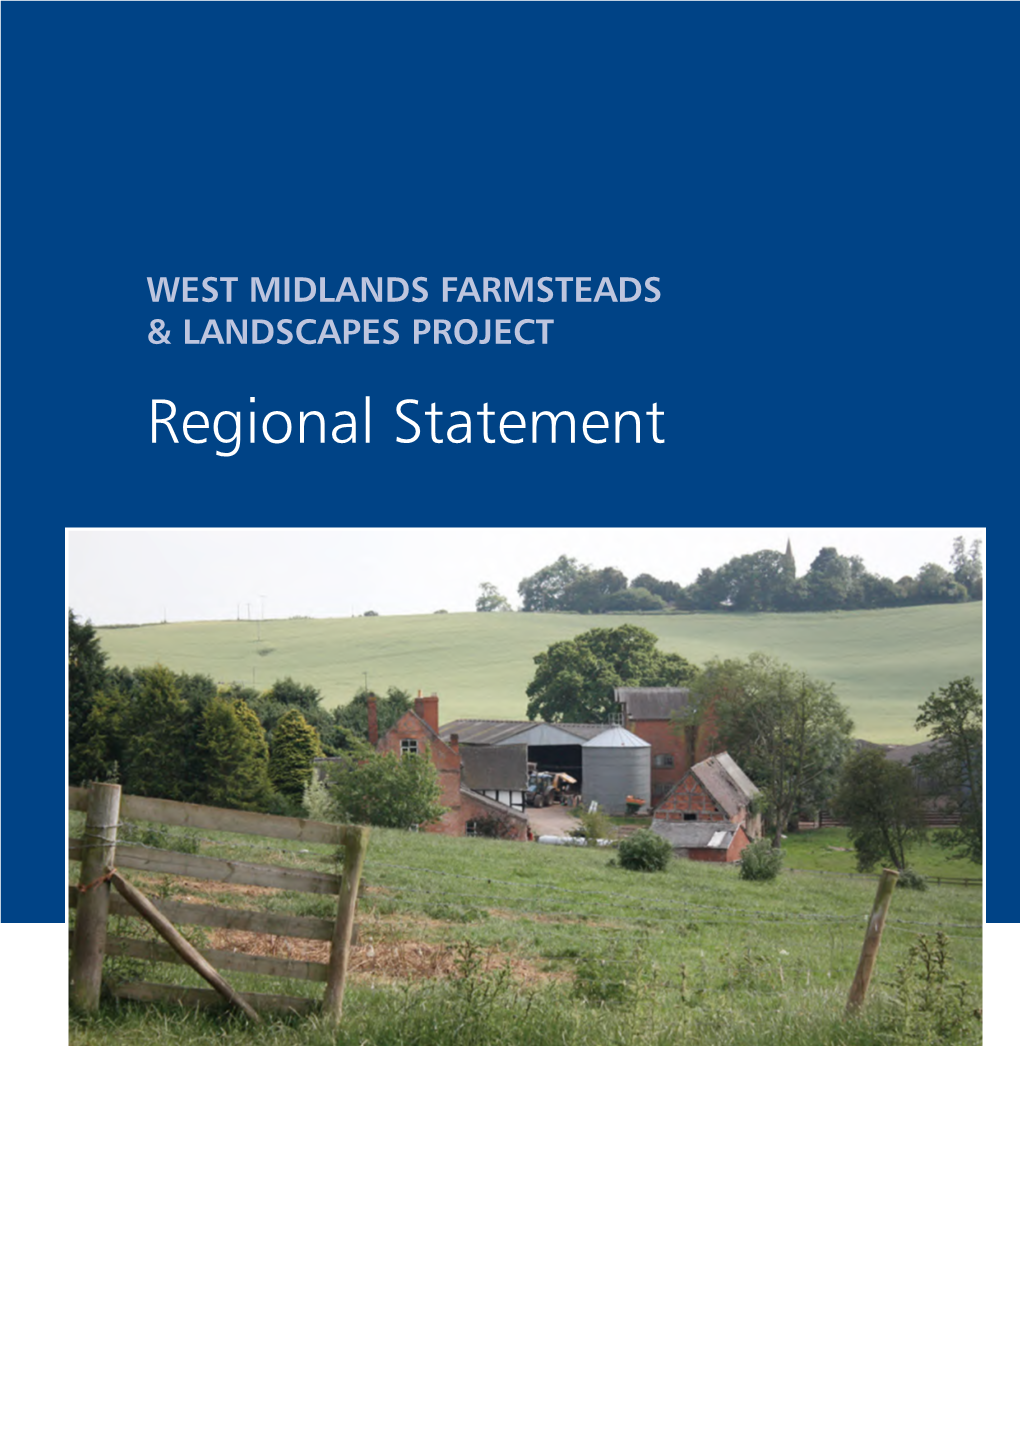 West Midlands Farmsteads & Landscapes Project